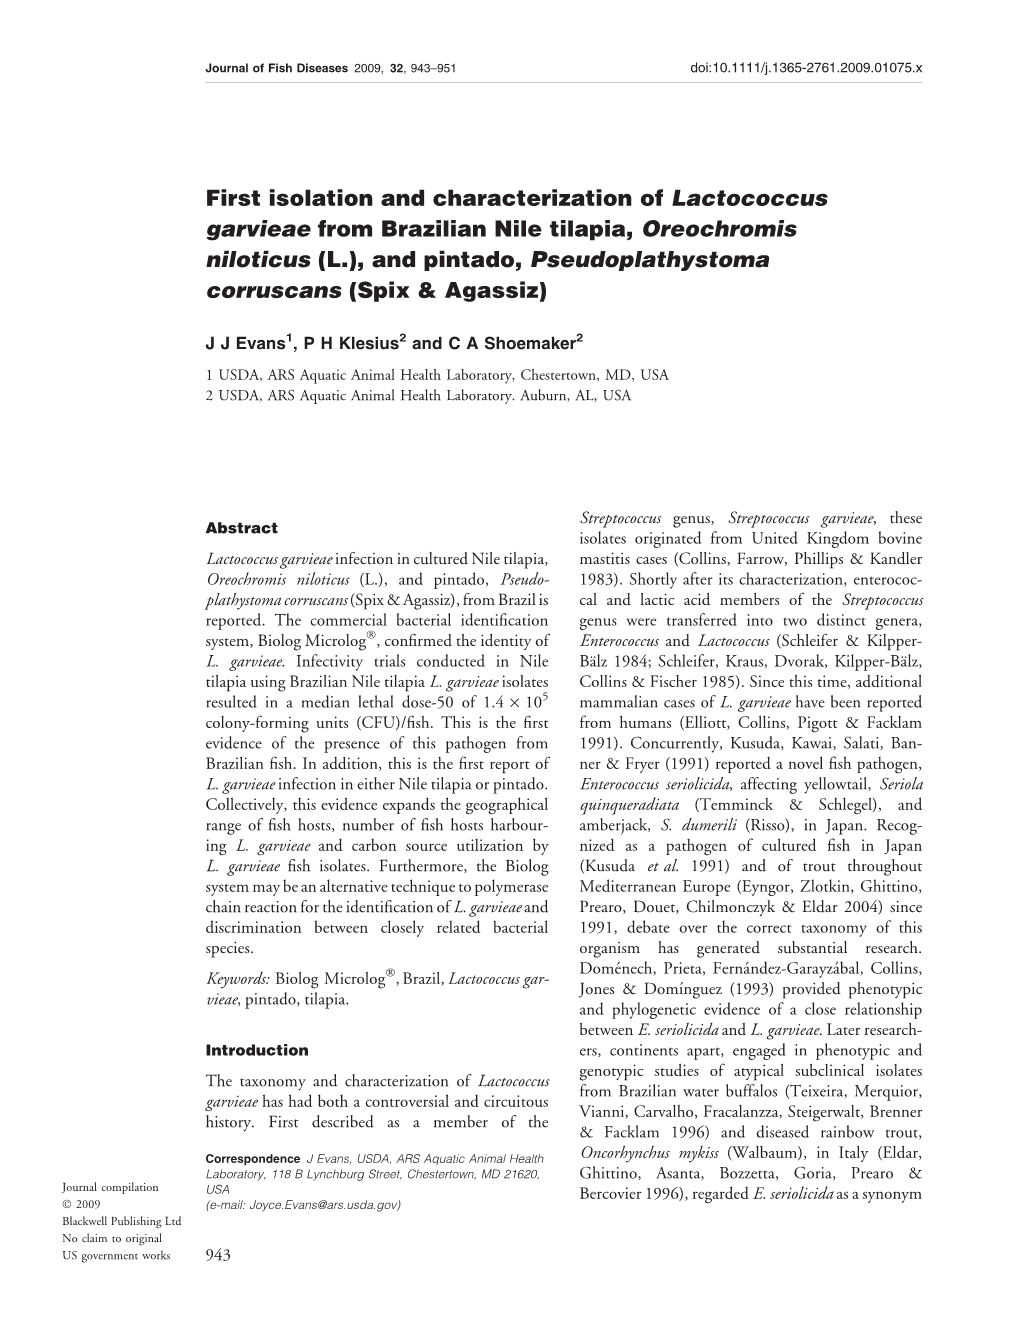 First Isolation and Characterization of Lactococcus Garvieae From